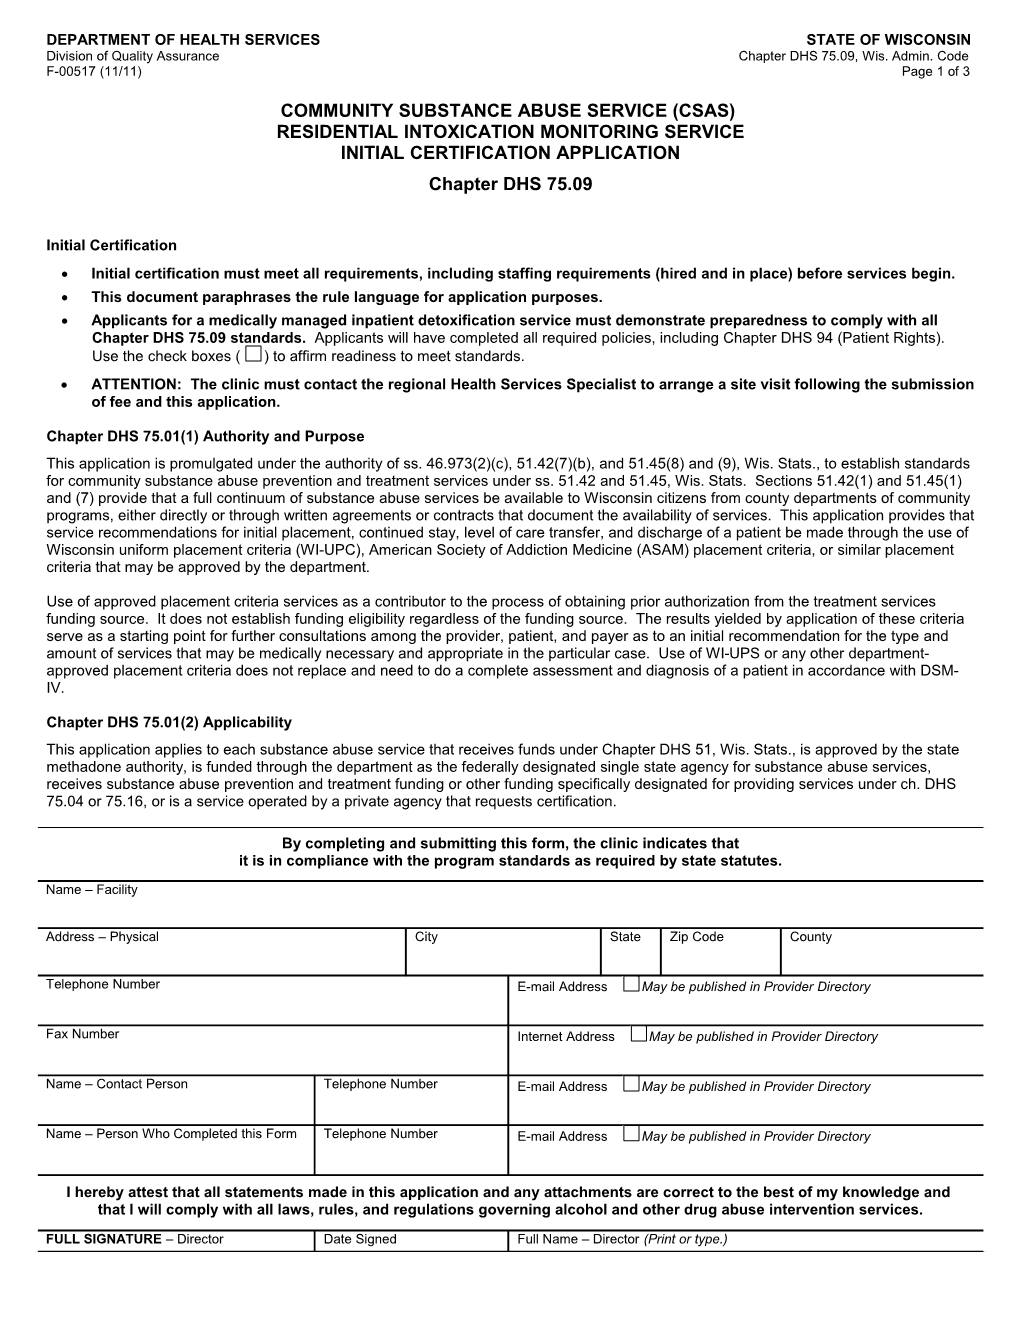 CSAS Residential Intoxication Monitoring Service Initial Certification Application-DHS